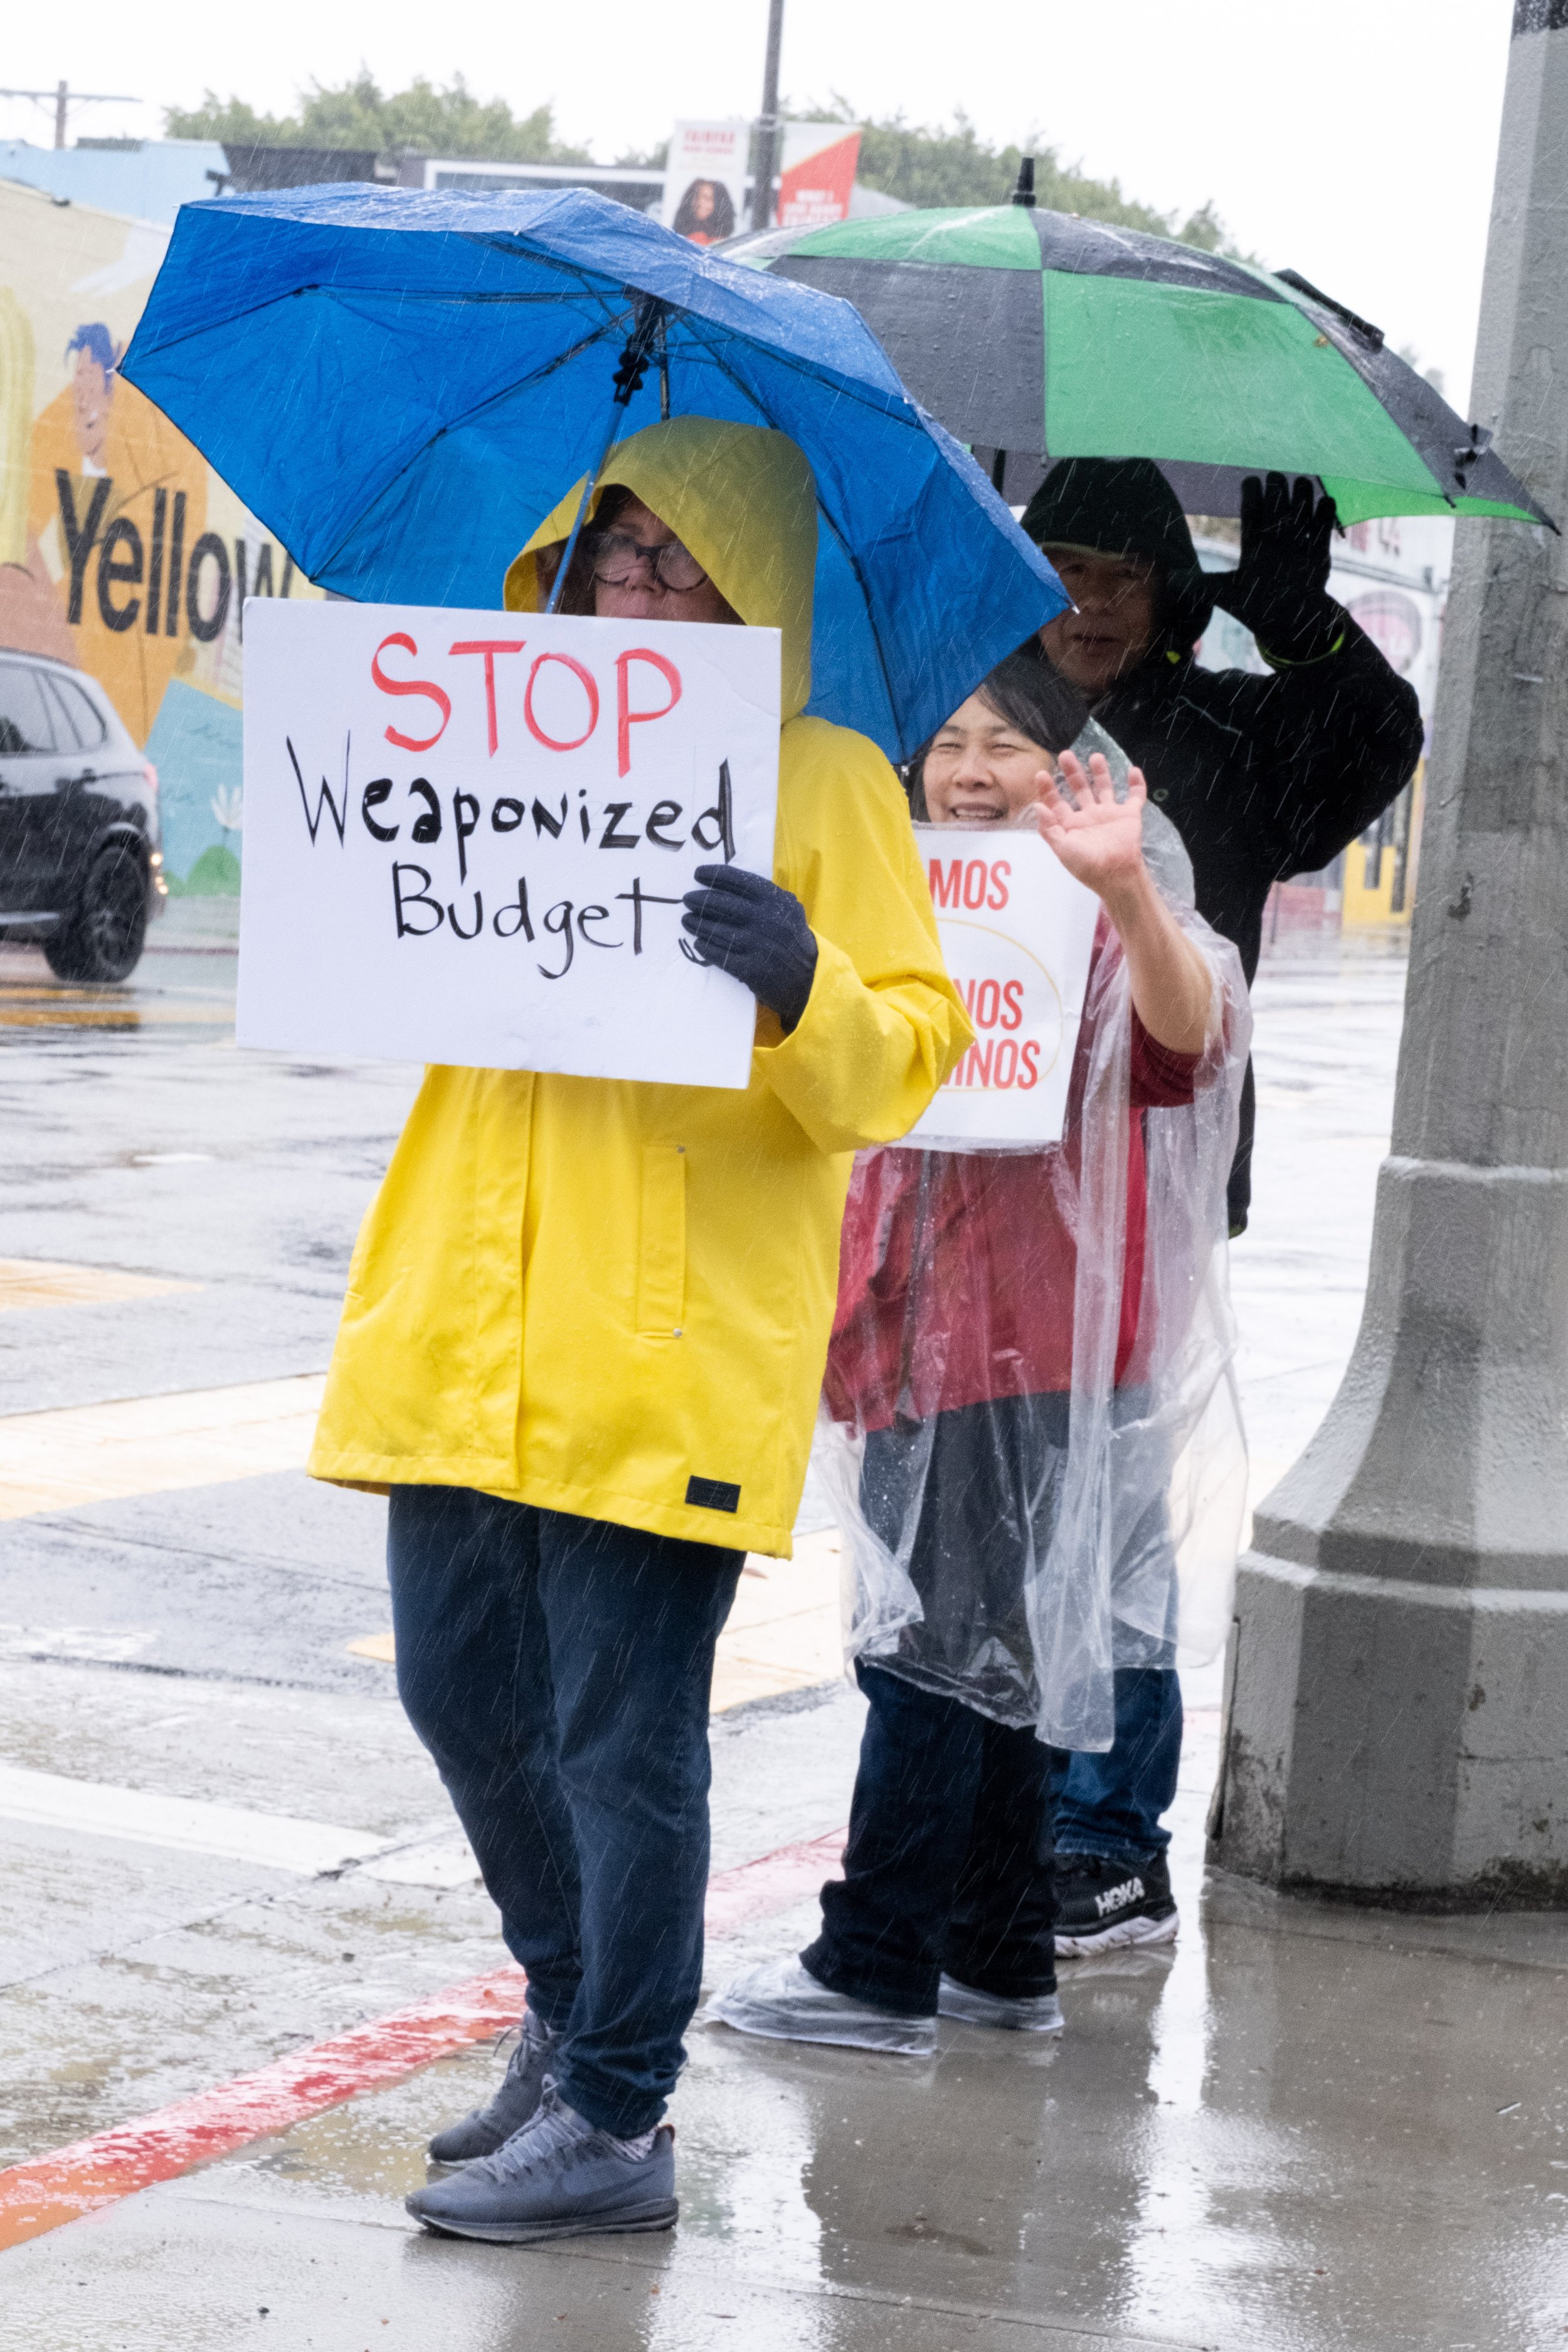  Tracy Cook, wearing a bright yellow rain coat, holds a sign saying "STOP Weaponized Budgets." Her son grew up in the Los Angeles Unified School District, and she continues to be an advocate for public education. She stands with other protestors in f